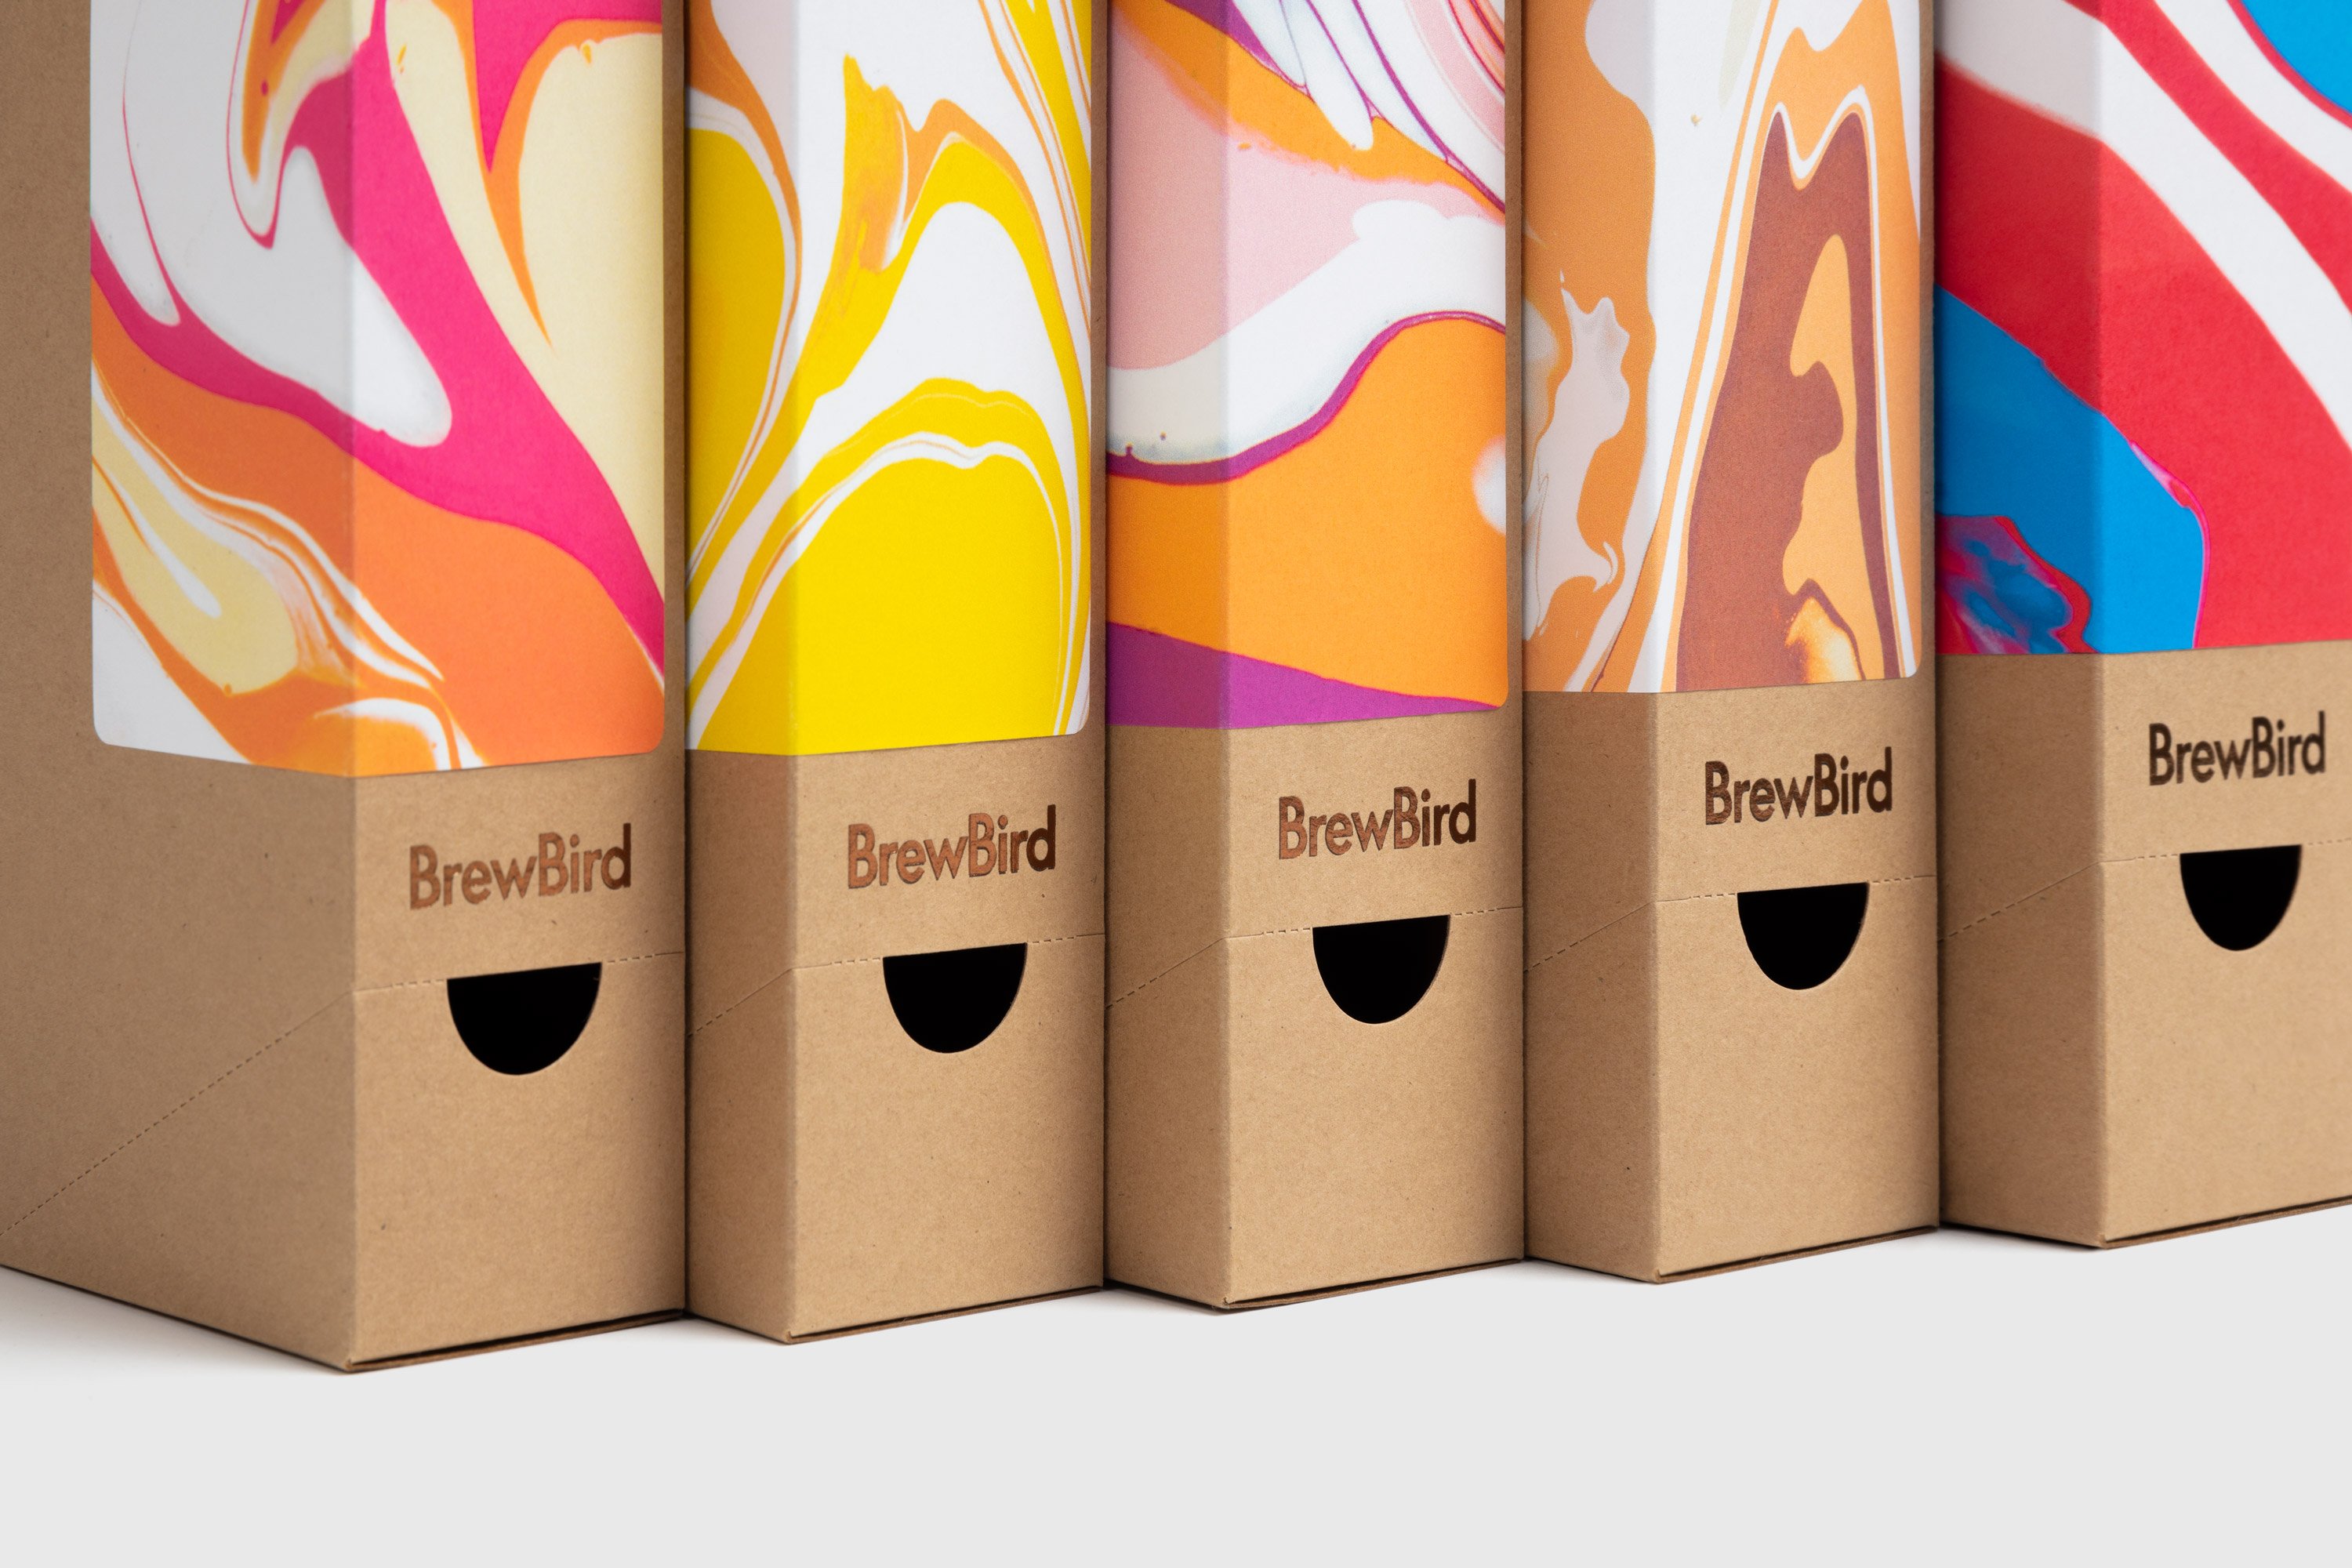 Logo, brand identity and packaging design for San Francisco coffee pod business BrewBird designed by Mucho